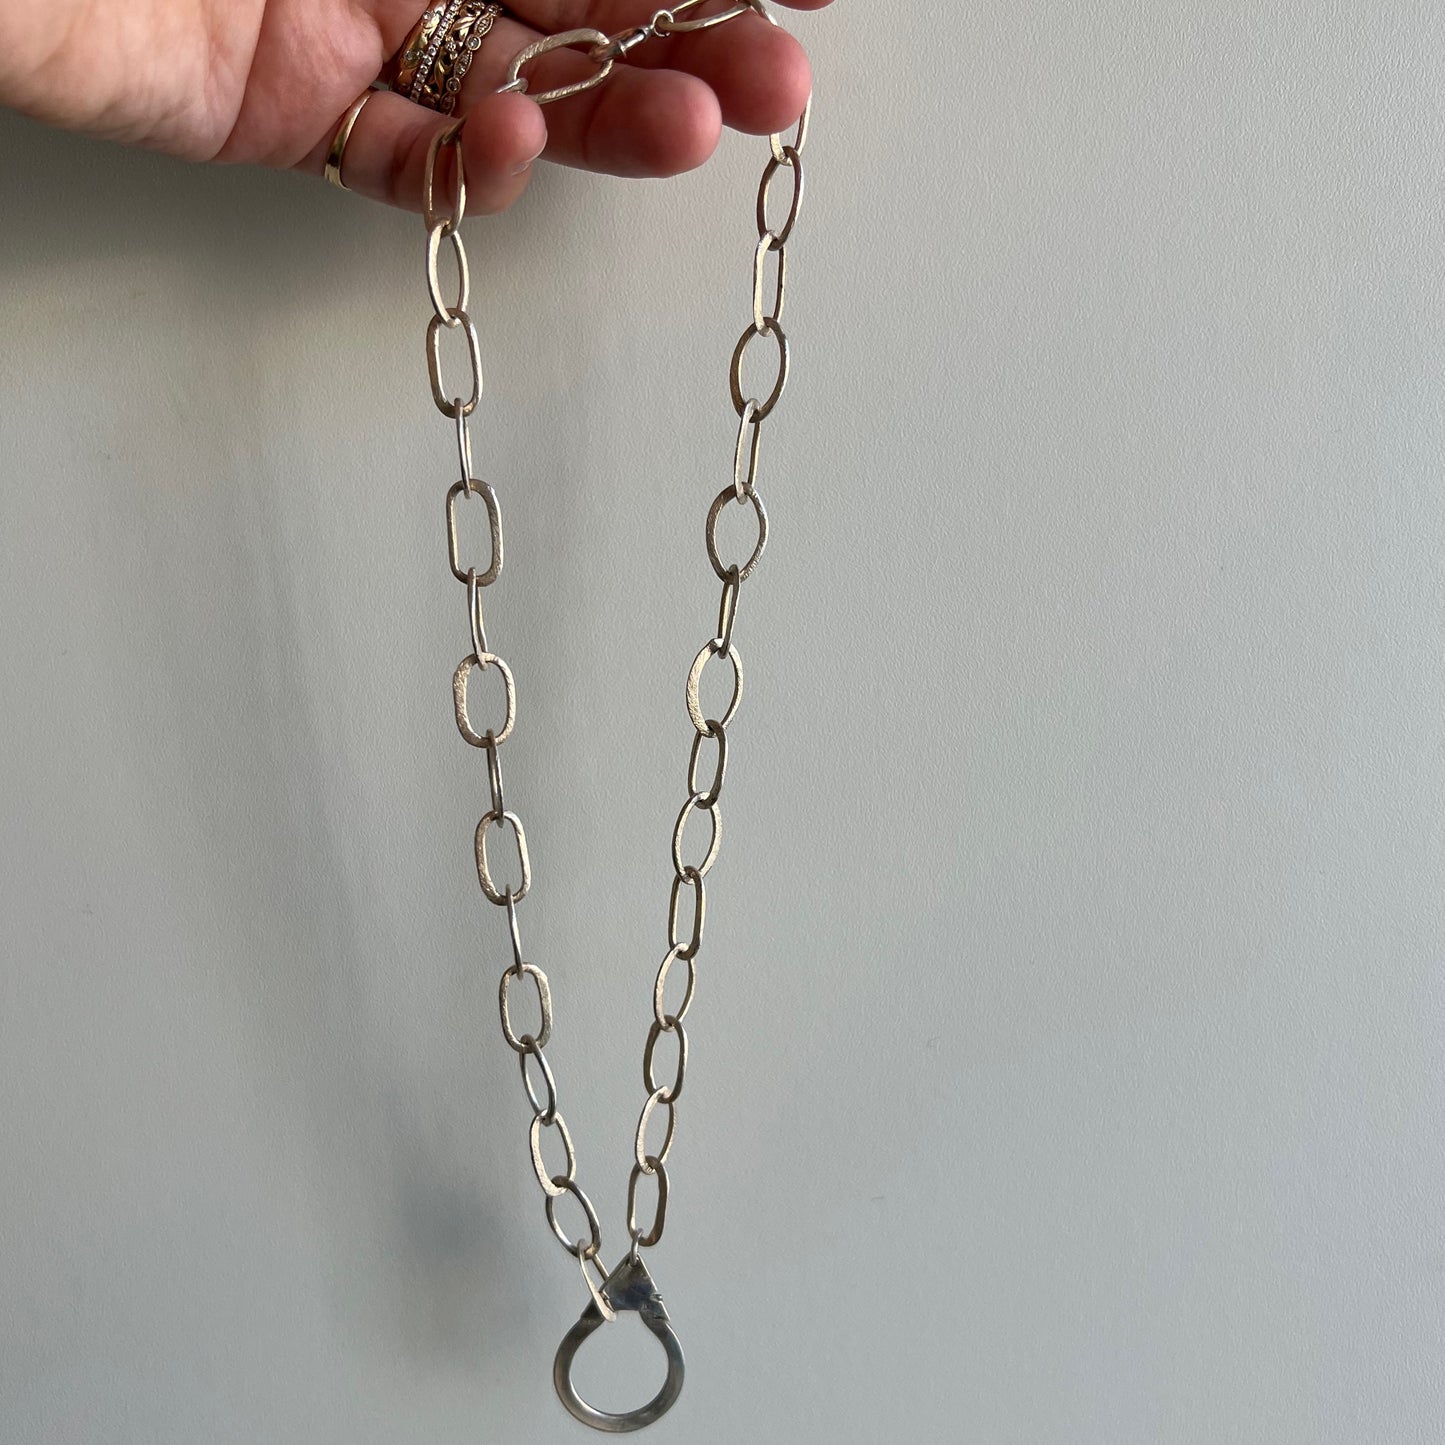 reimagined V I N T A G E // all linked up / sterling silver hammered brushed oval link chain with a connector clasp / 17"